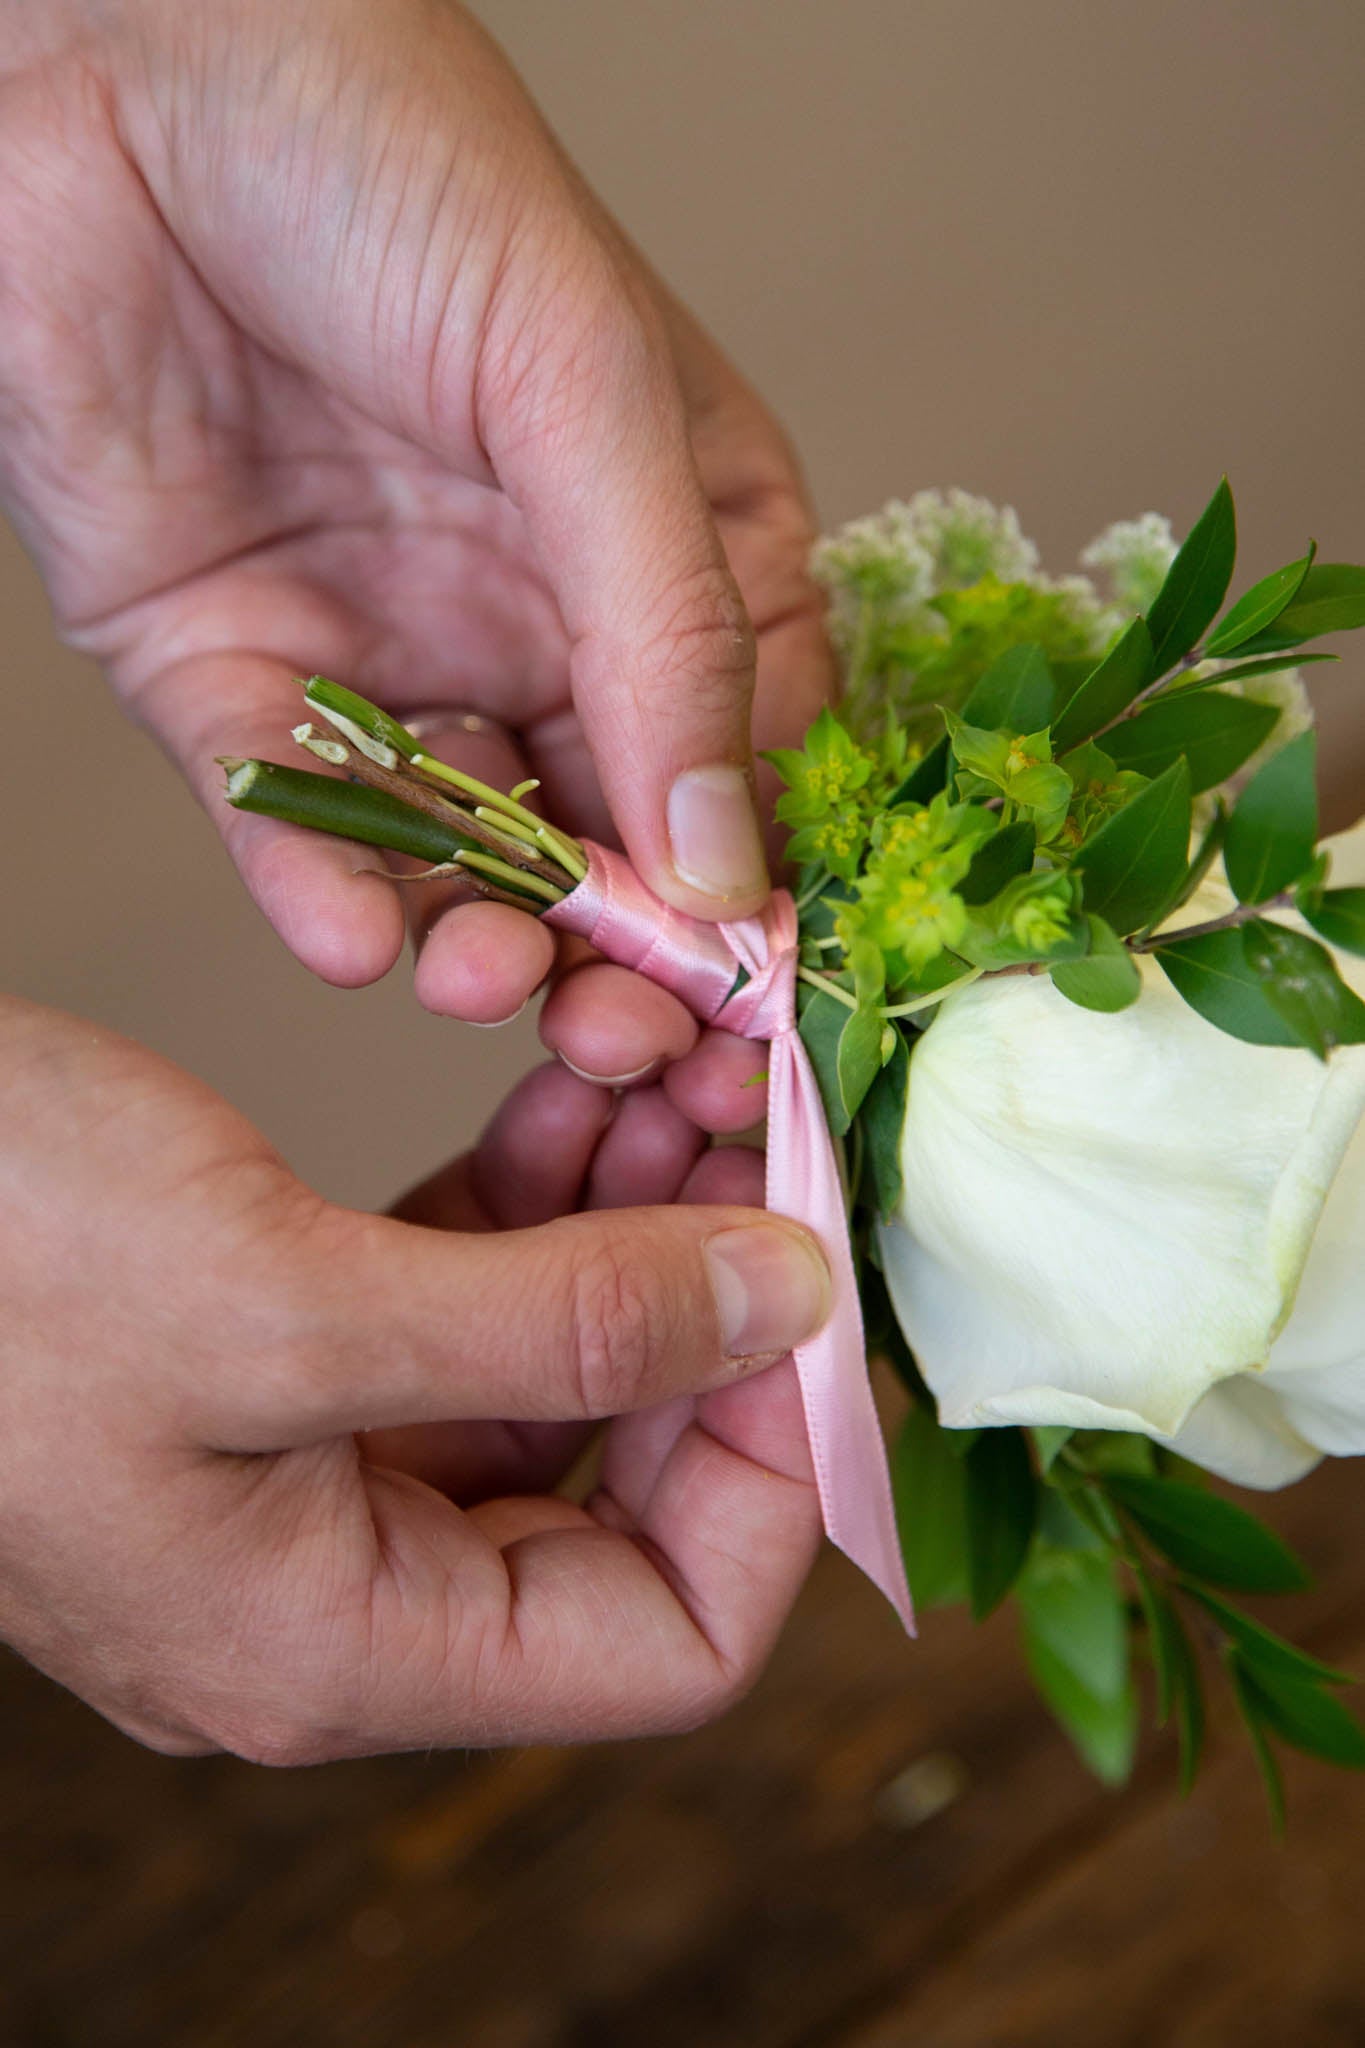 Finish your DIY boutonniere by wrapping the stems and tape in ribbon